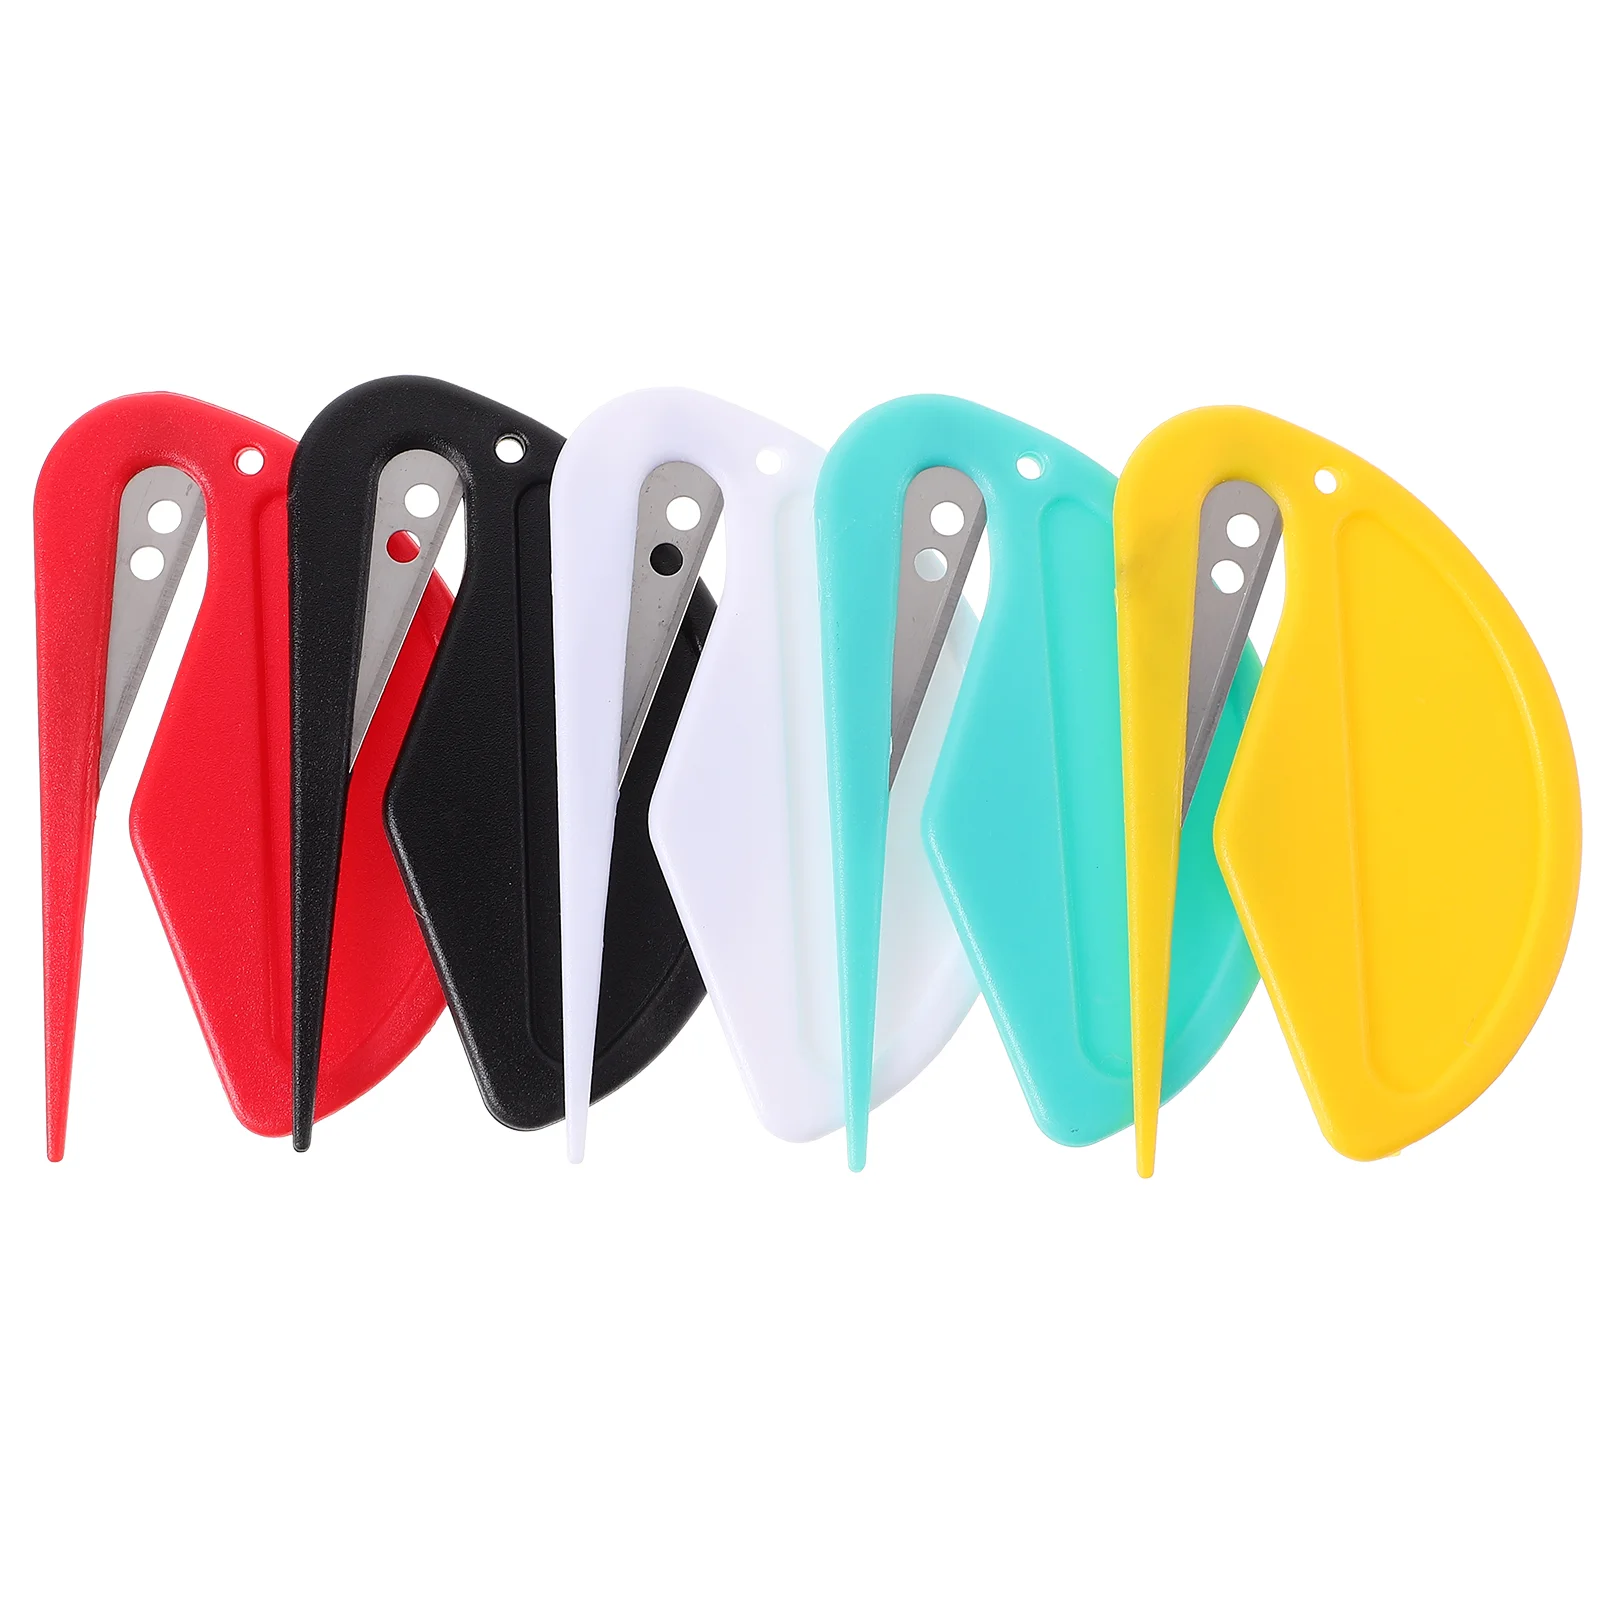 Letter Opener Envelope Slitter Mail Opener Portable Box Small Cutter Envelope Opening Tool for Delivery Envelope Package multifunctional coin knife box cutter small mini keychain tool portable stainless steel knife letter opener envelope opener